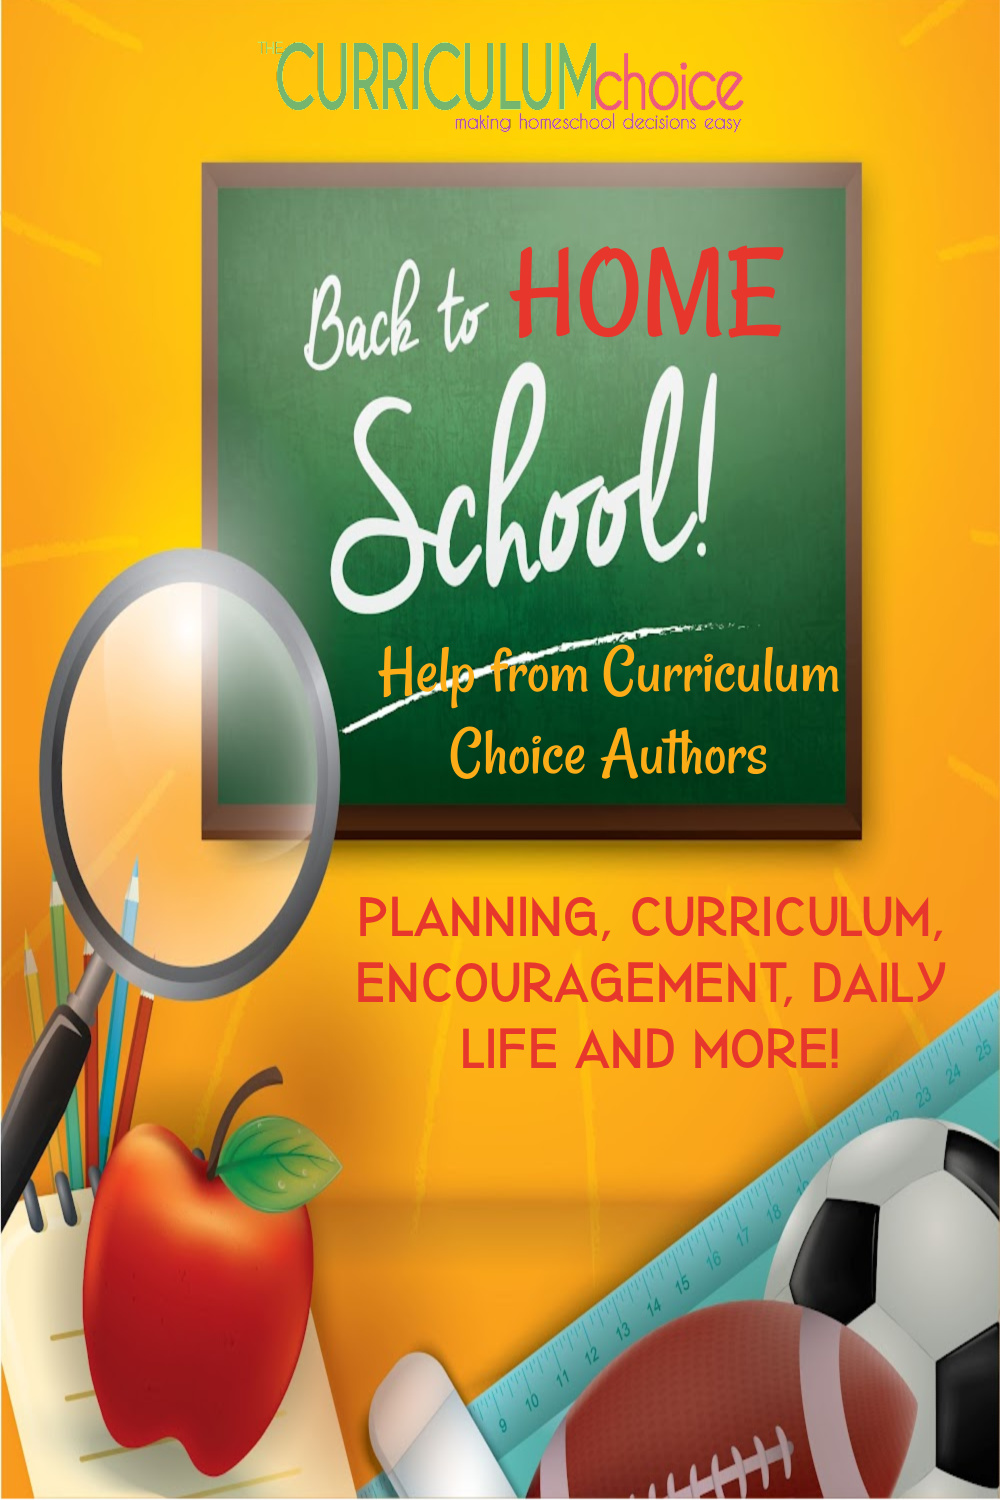 Back to Homeschool Help from Curriculum Choice Authors is a feast of curriculum help, planning tips, encouragement, daily living advice & more!